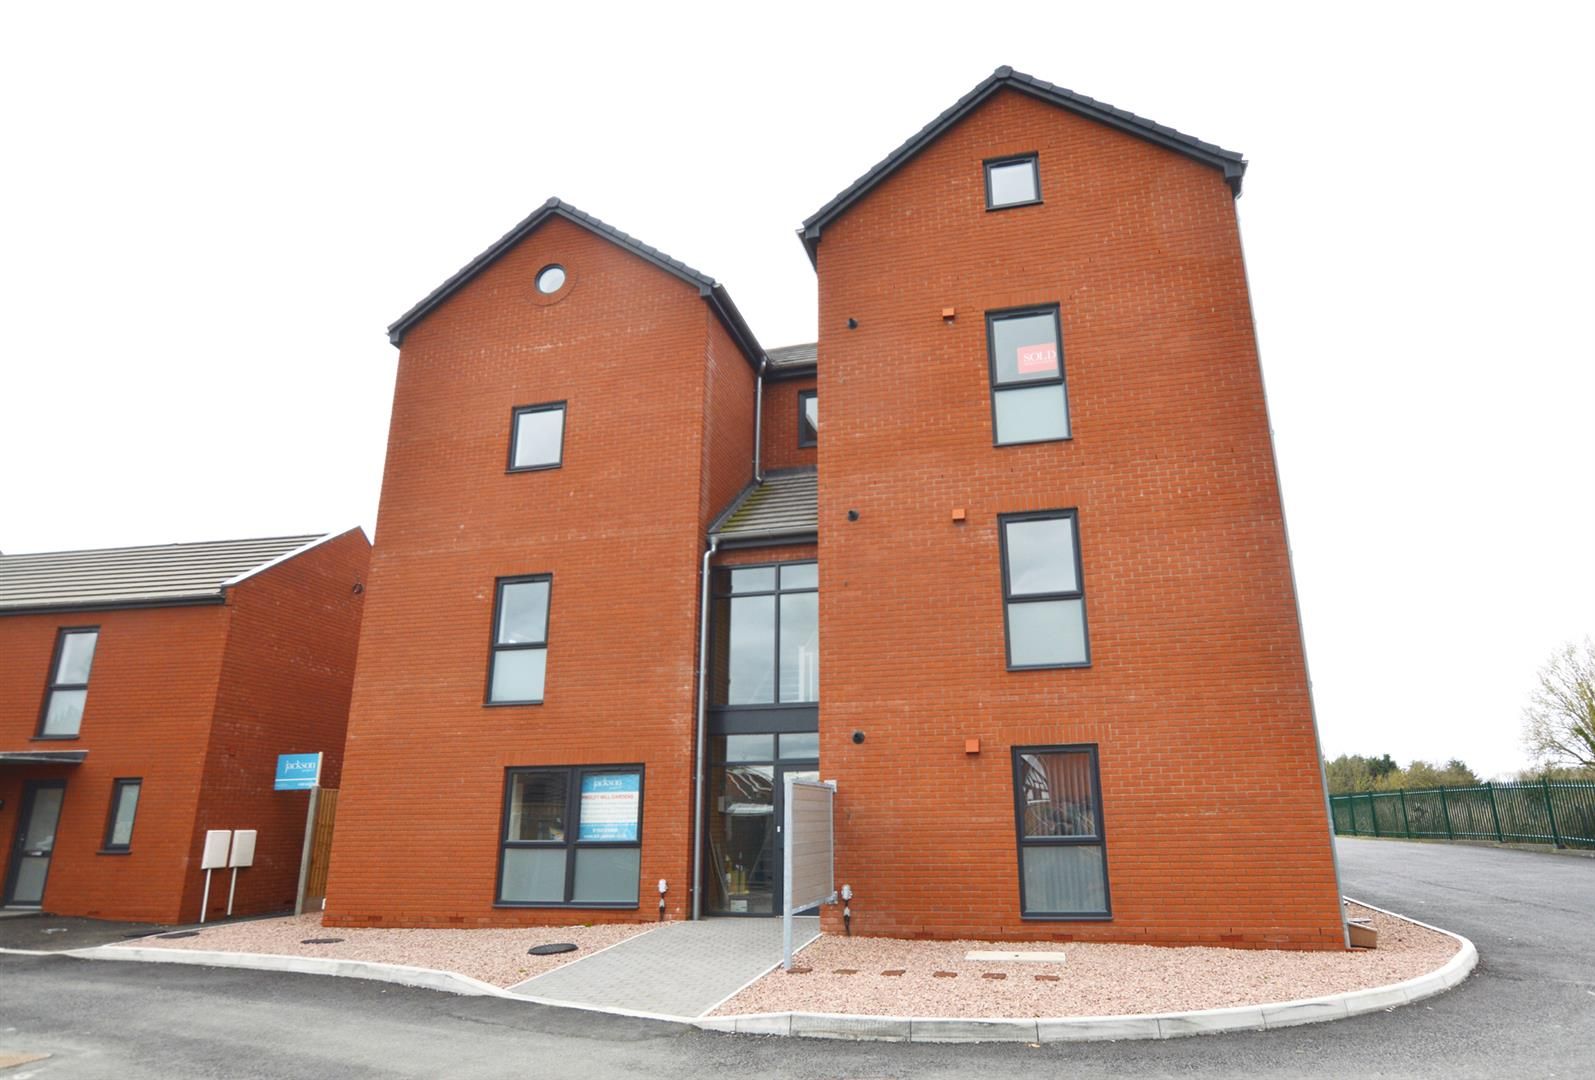 2 bed apartment for sale in Leominster 1